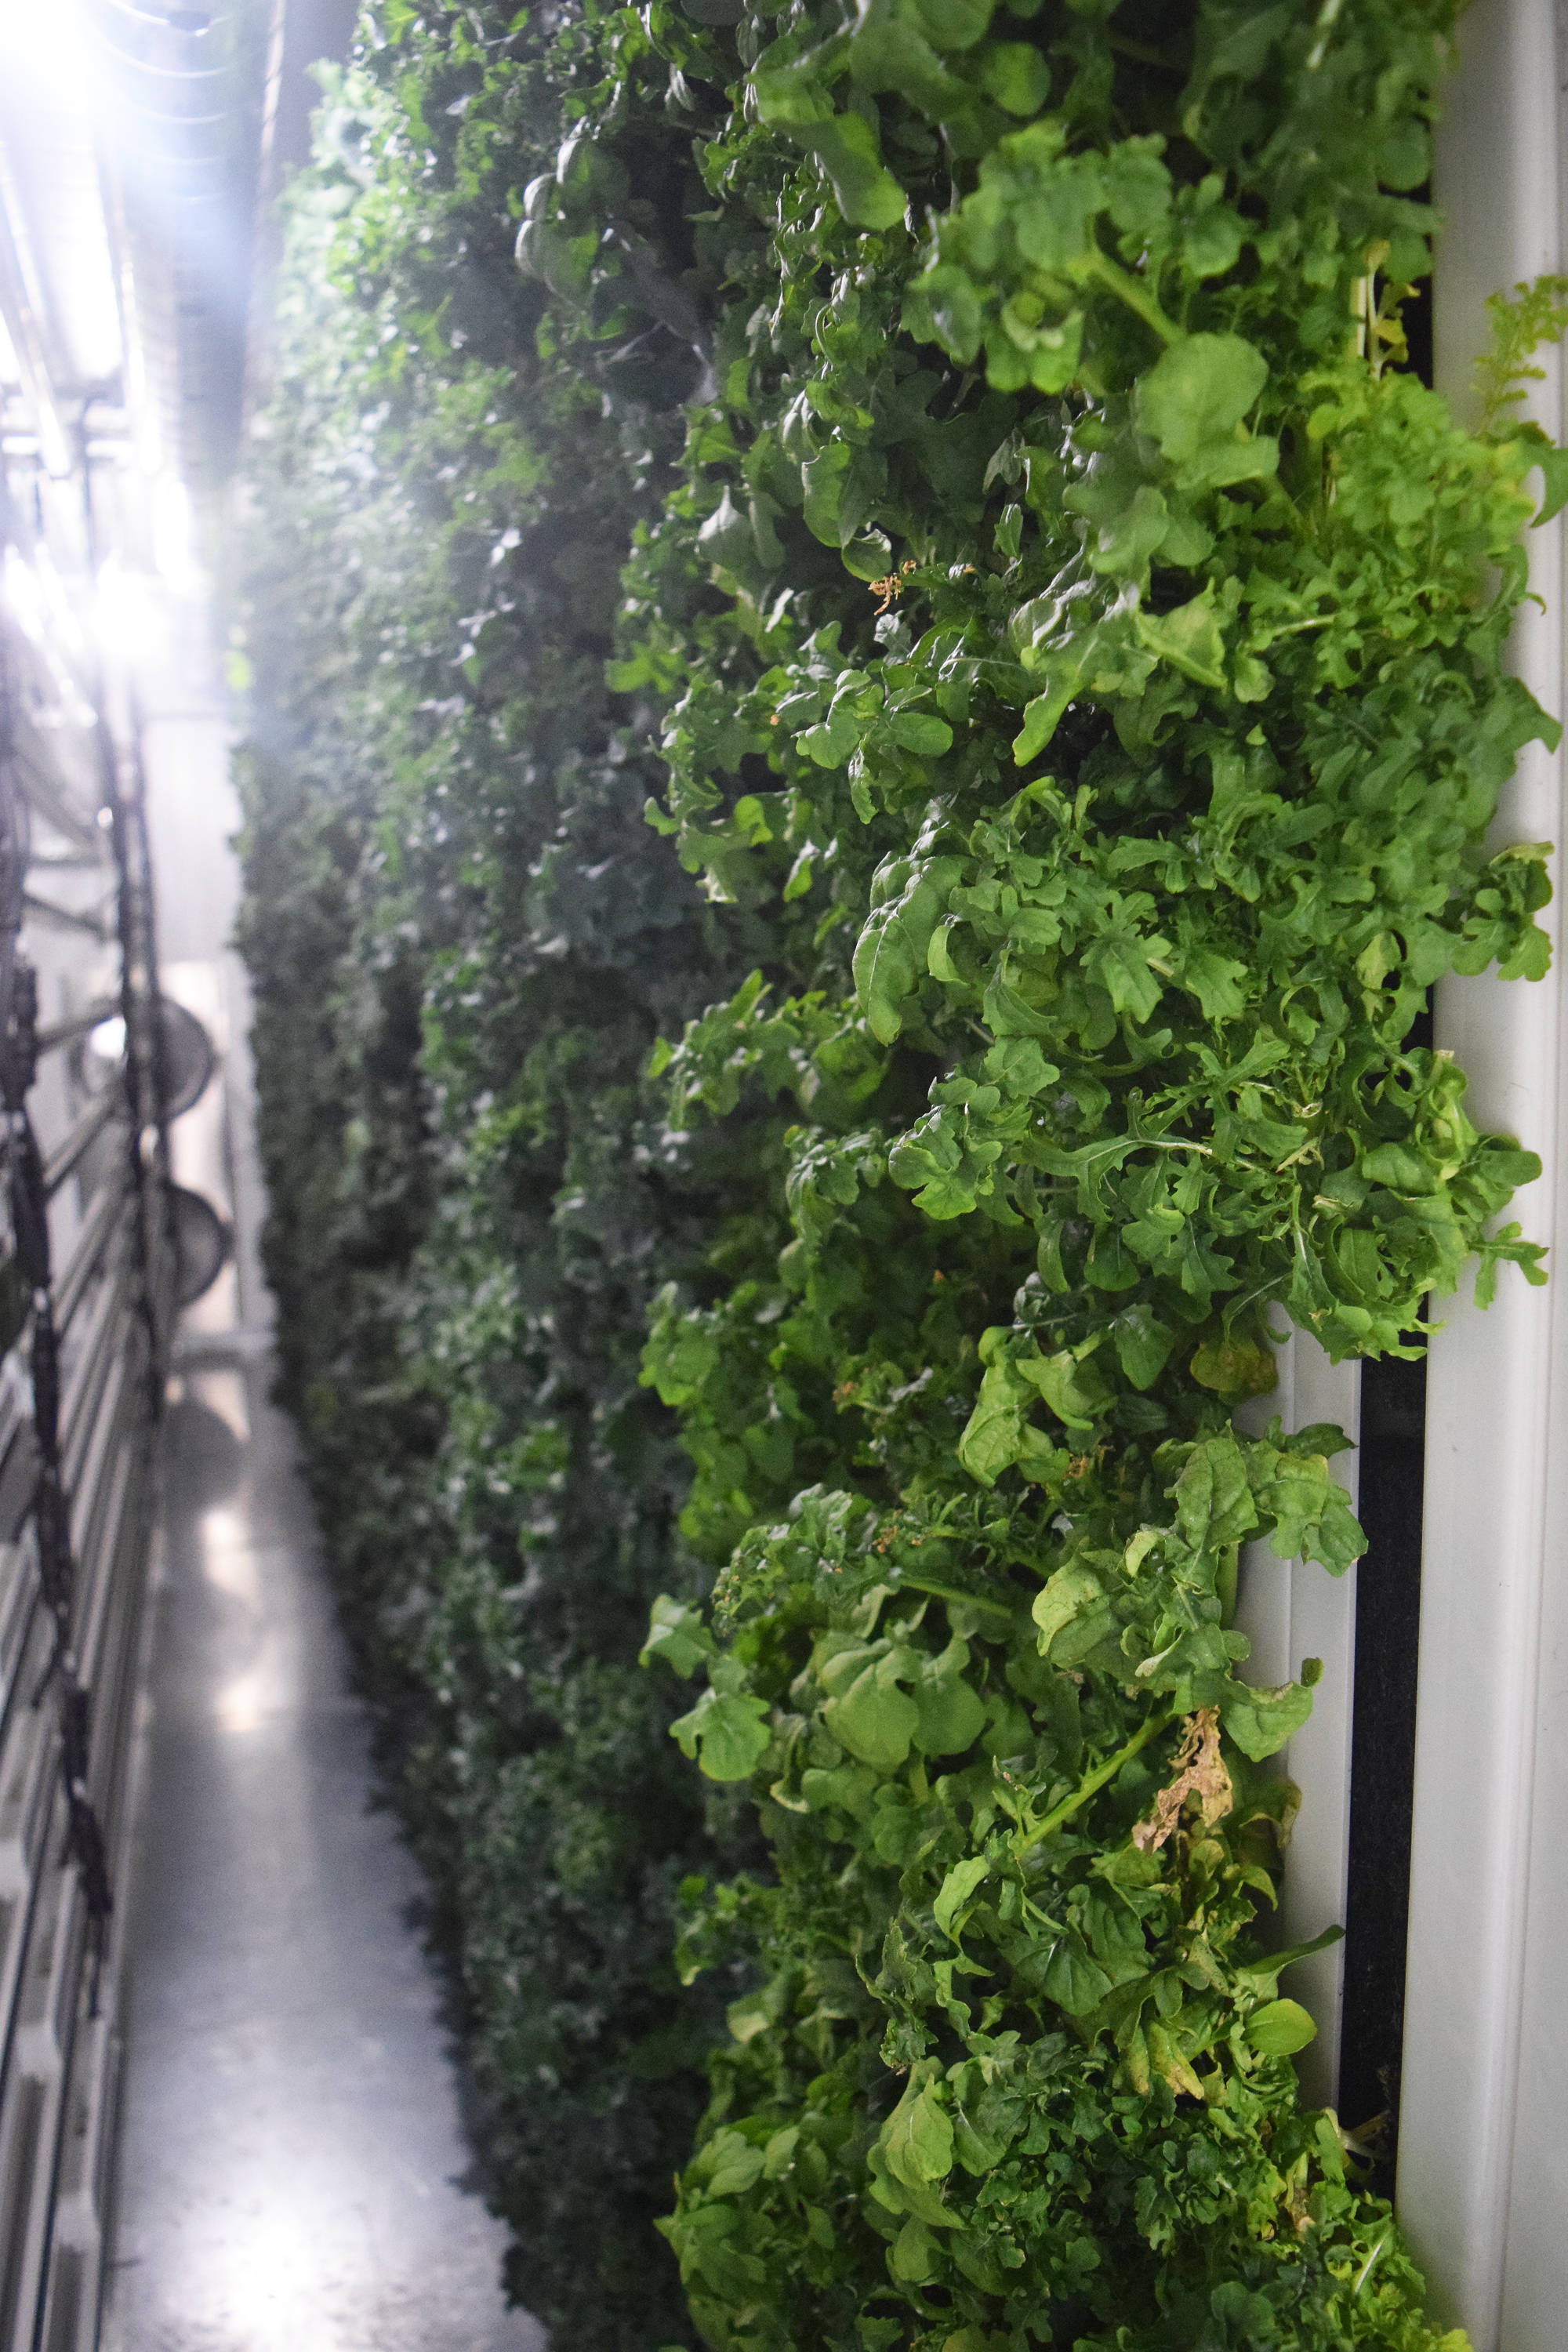 Fresh lettuce grows in vertical grows at Fresh365 in Soldotna. (Photo by Joey Klecka/Peninsula Clarion)